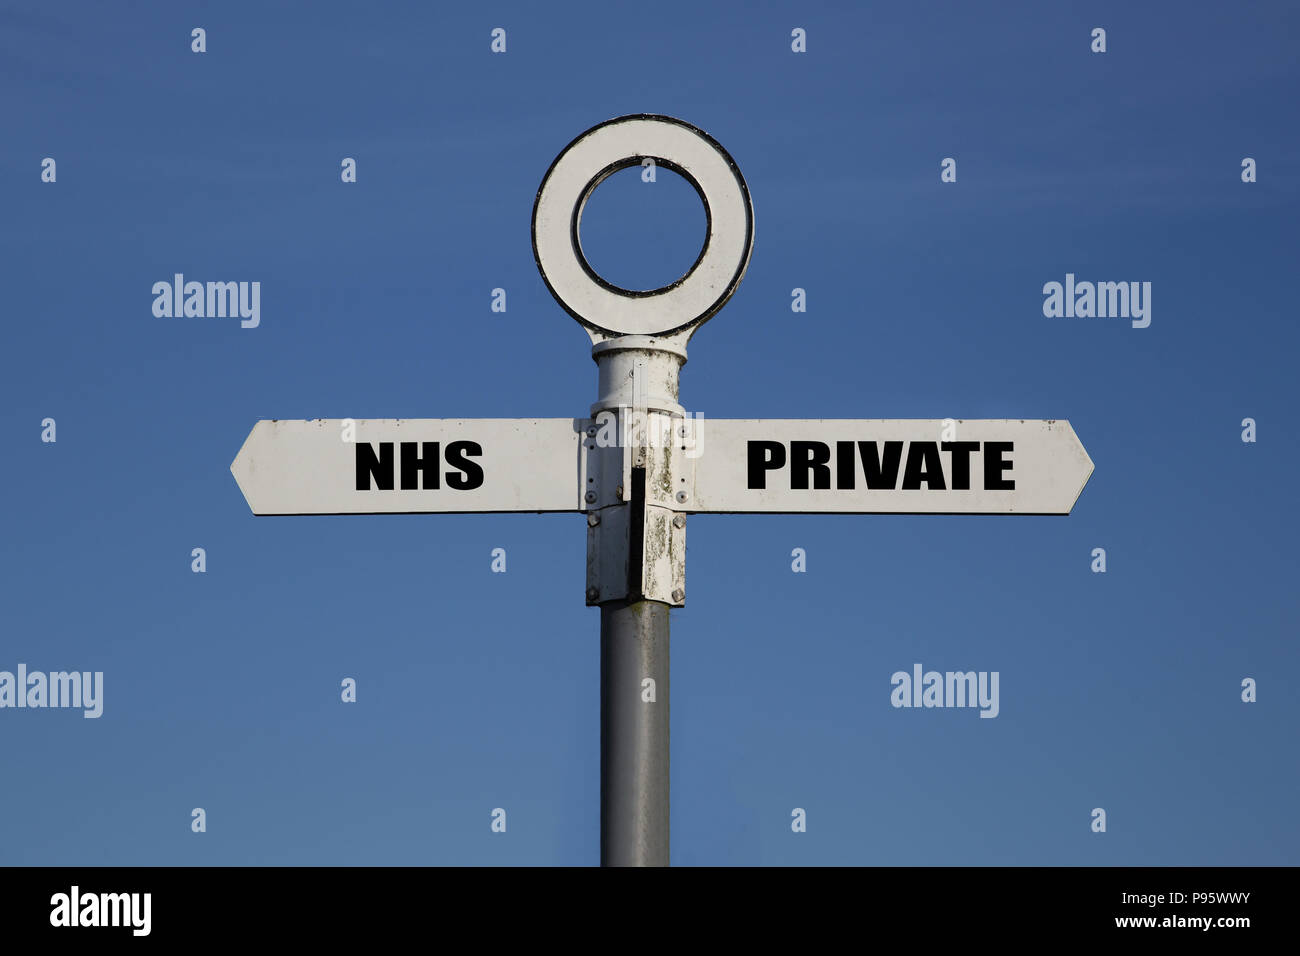 Old road sign with NHS and private pointing in opposite directions against a blue sky Stock Photo